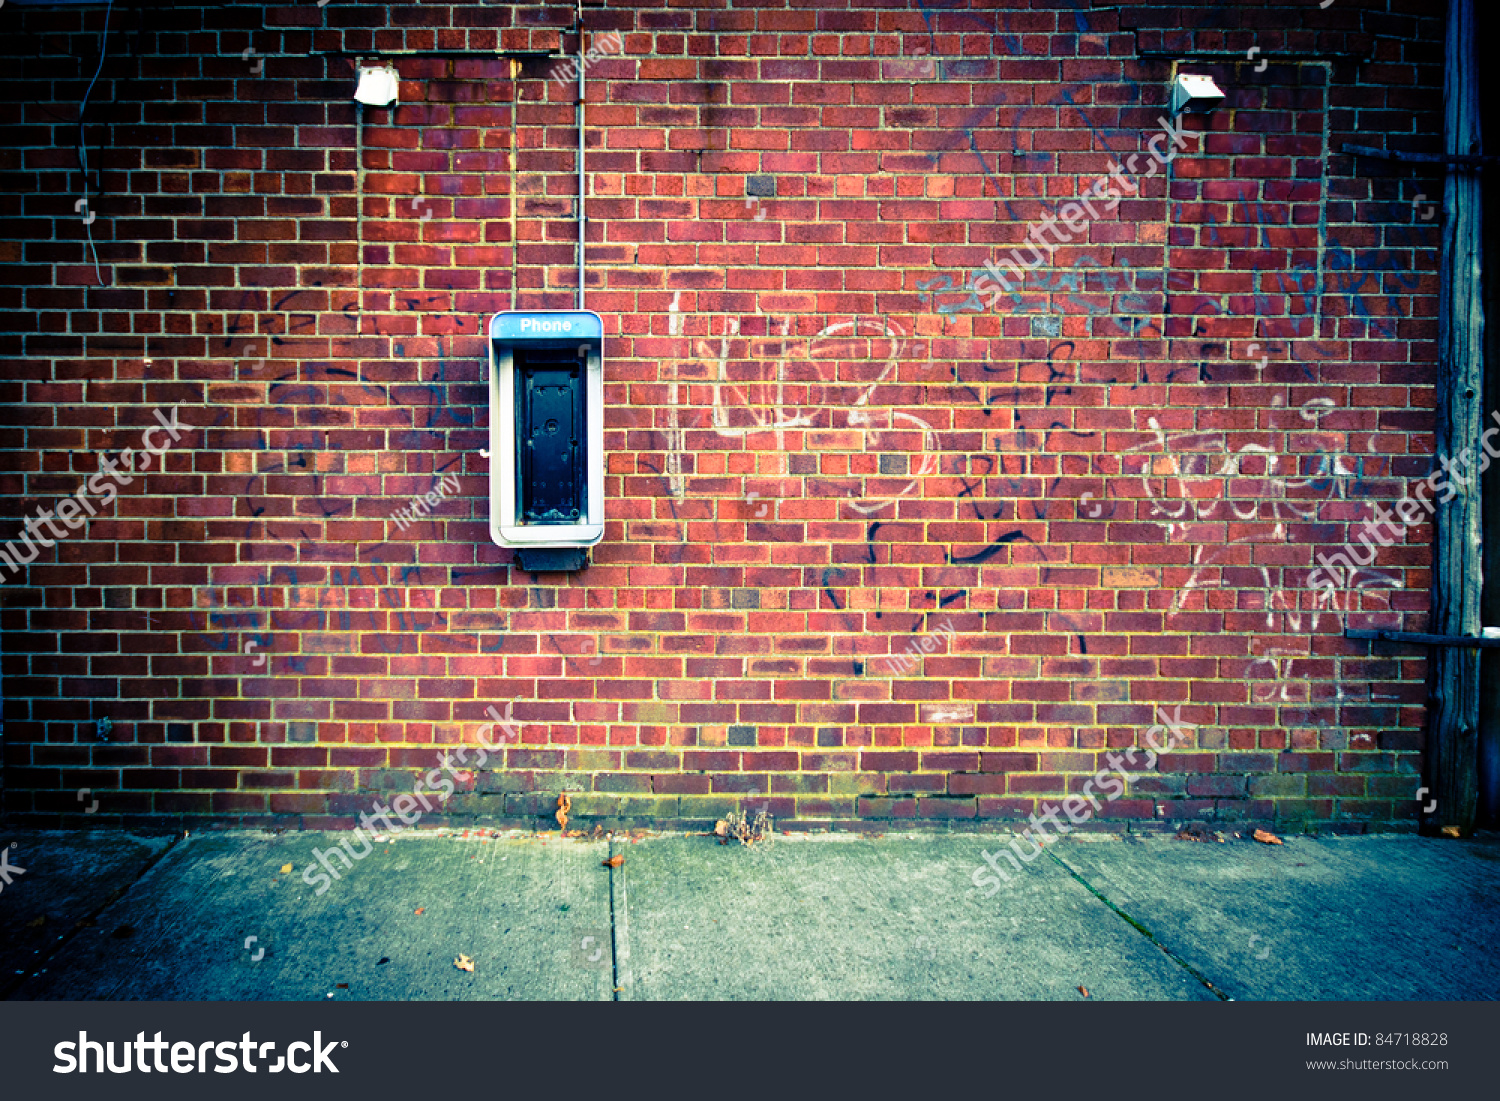 Grungy urban background of a brick wall with an old out of service payphone on it #84718828